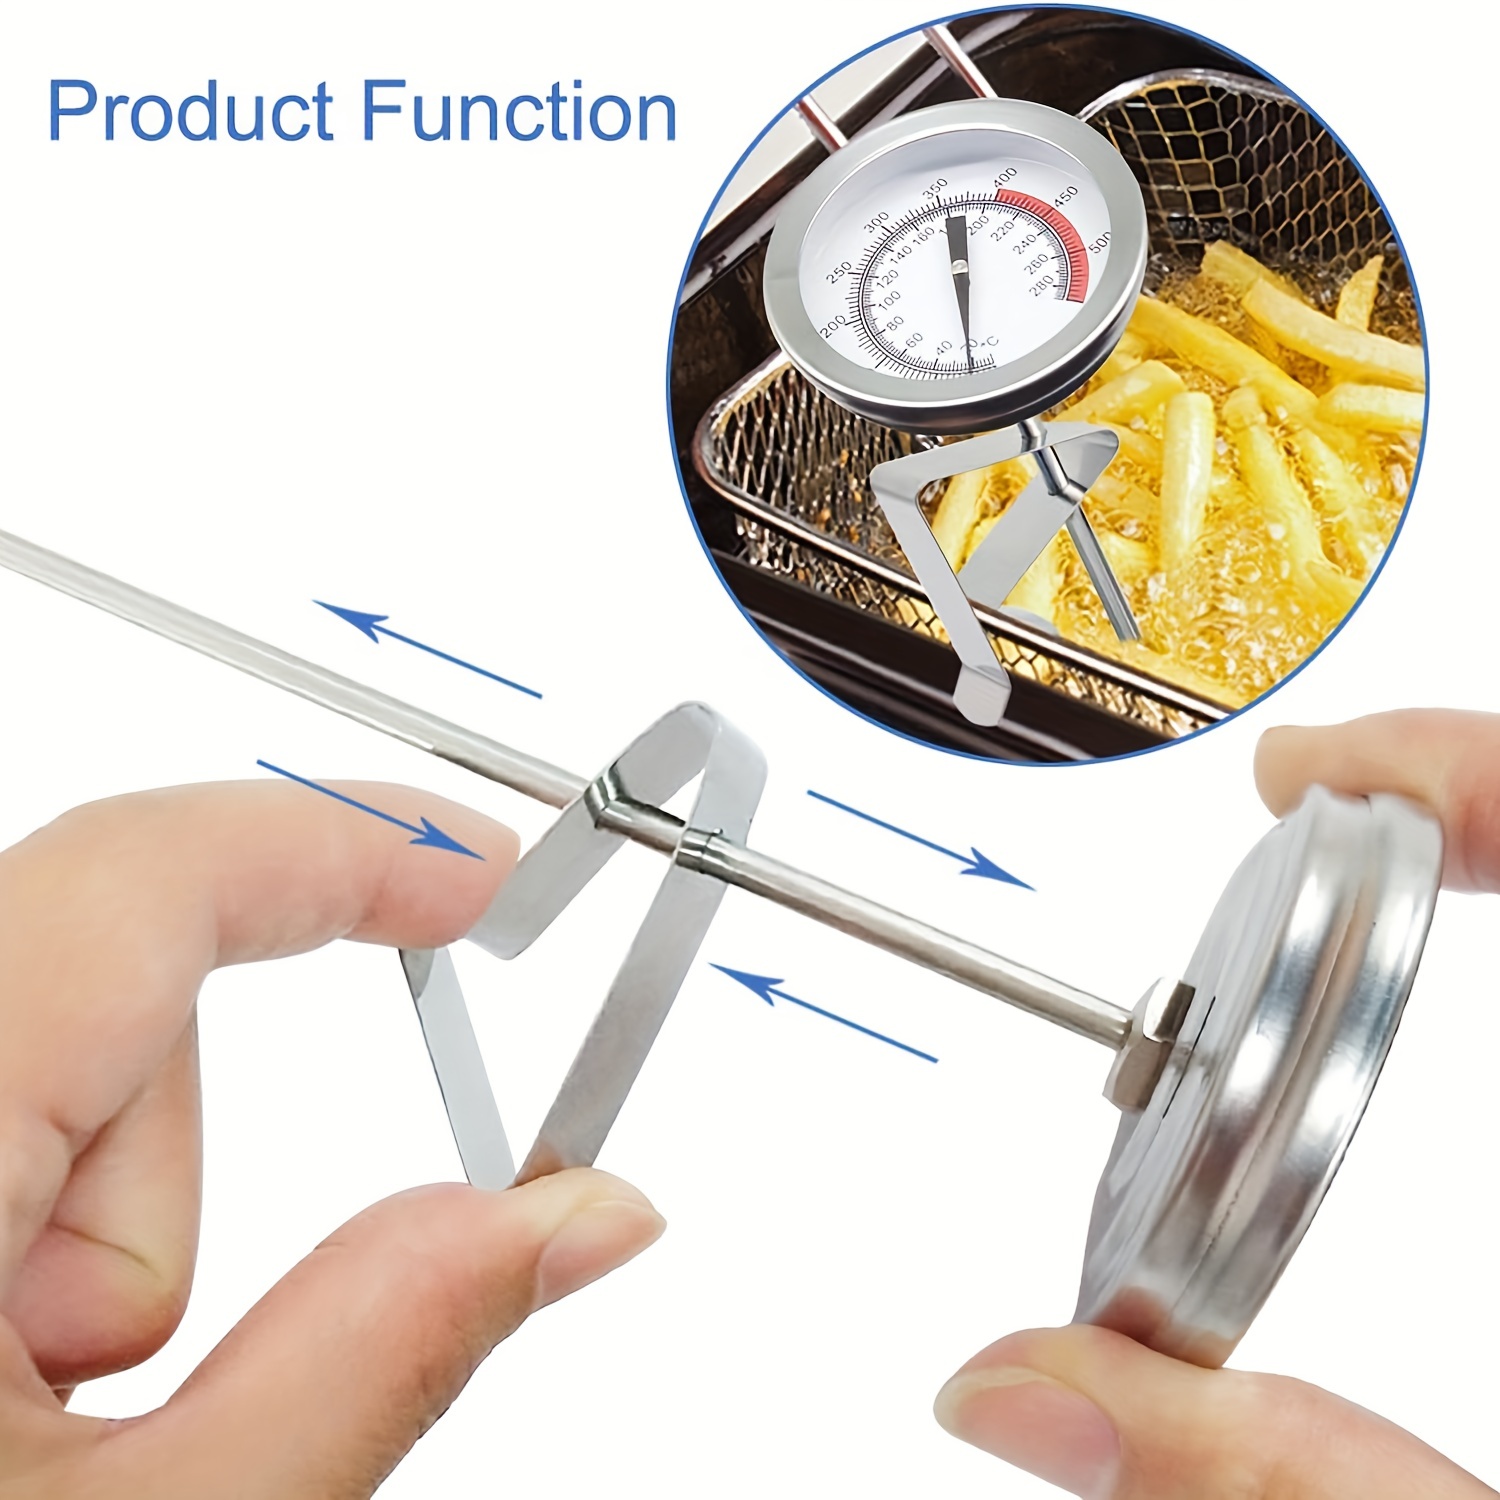 12 Meat Cooking Thermometer Stainless Steel Stem BBQ Grill Turkey Deep Fry